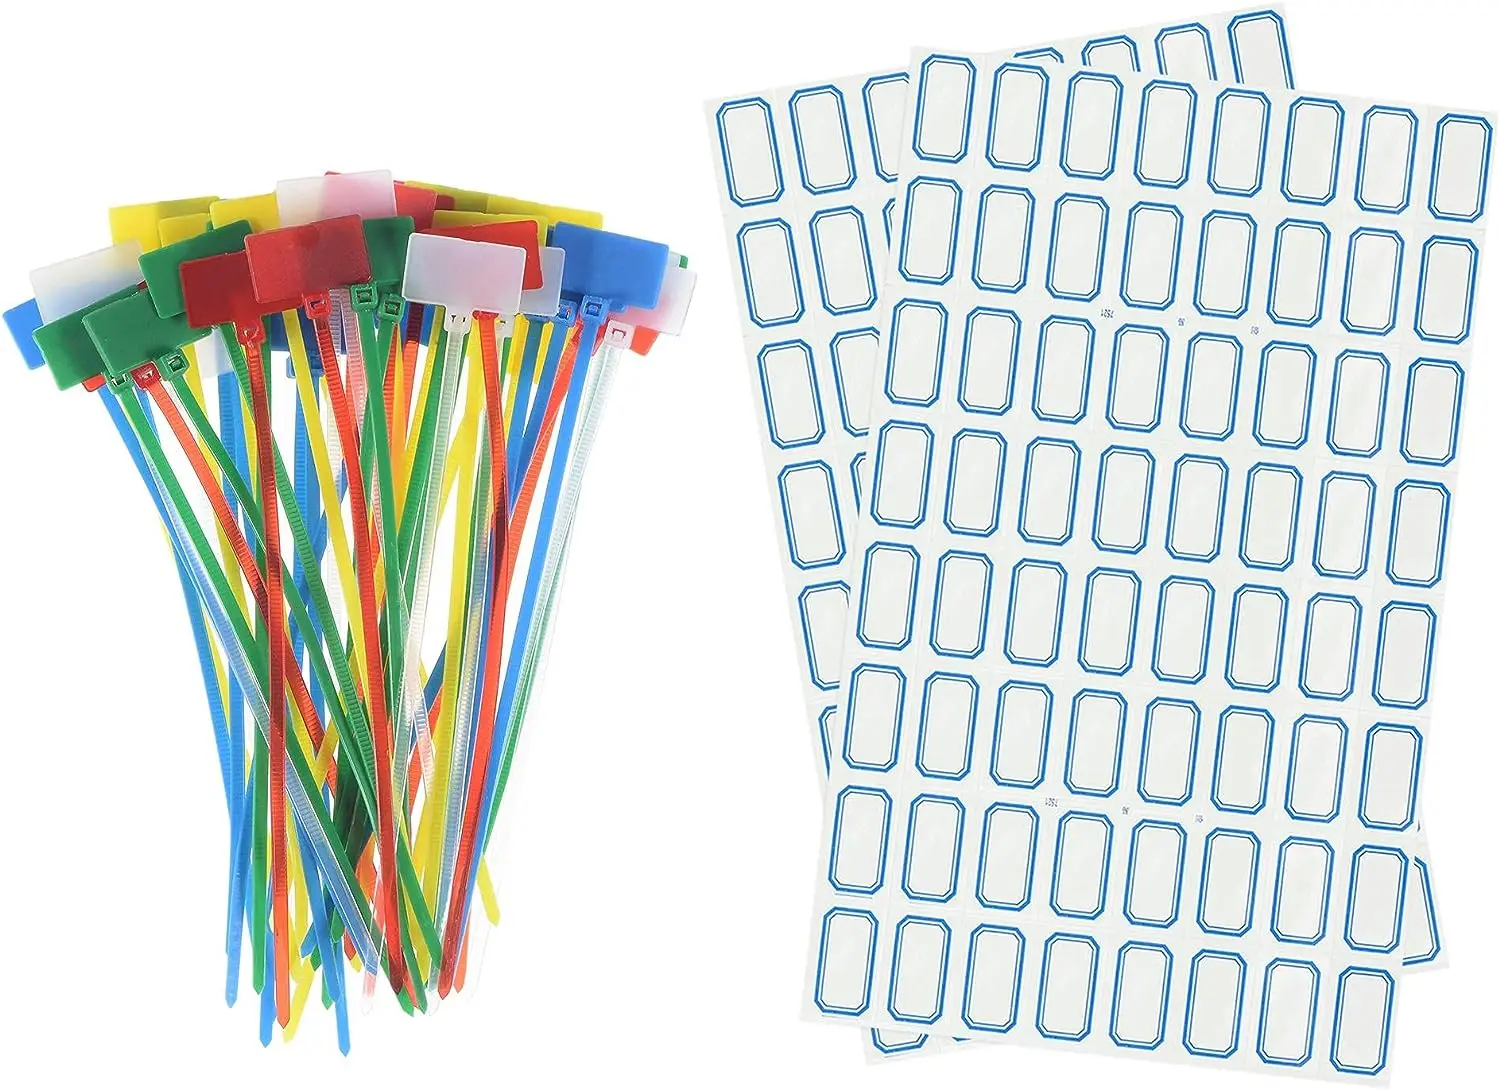 

Tcenofoxy 50pcs Nylon Cable Ties Tags Label Marker Self-Locking for Marking Organizing White/Red/Green/Blue/Yellow